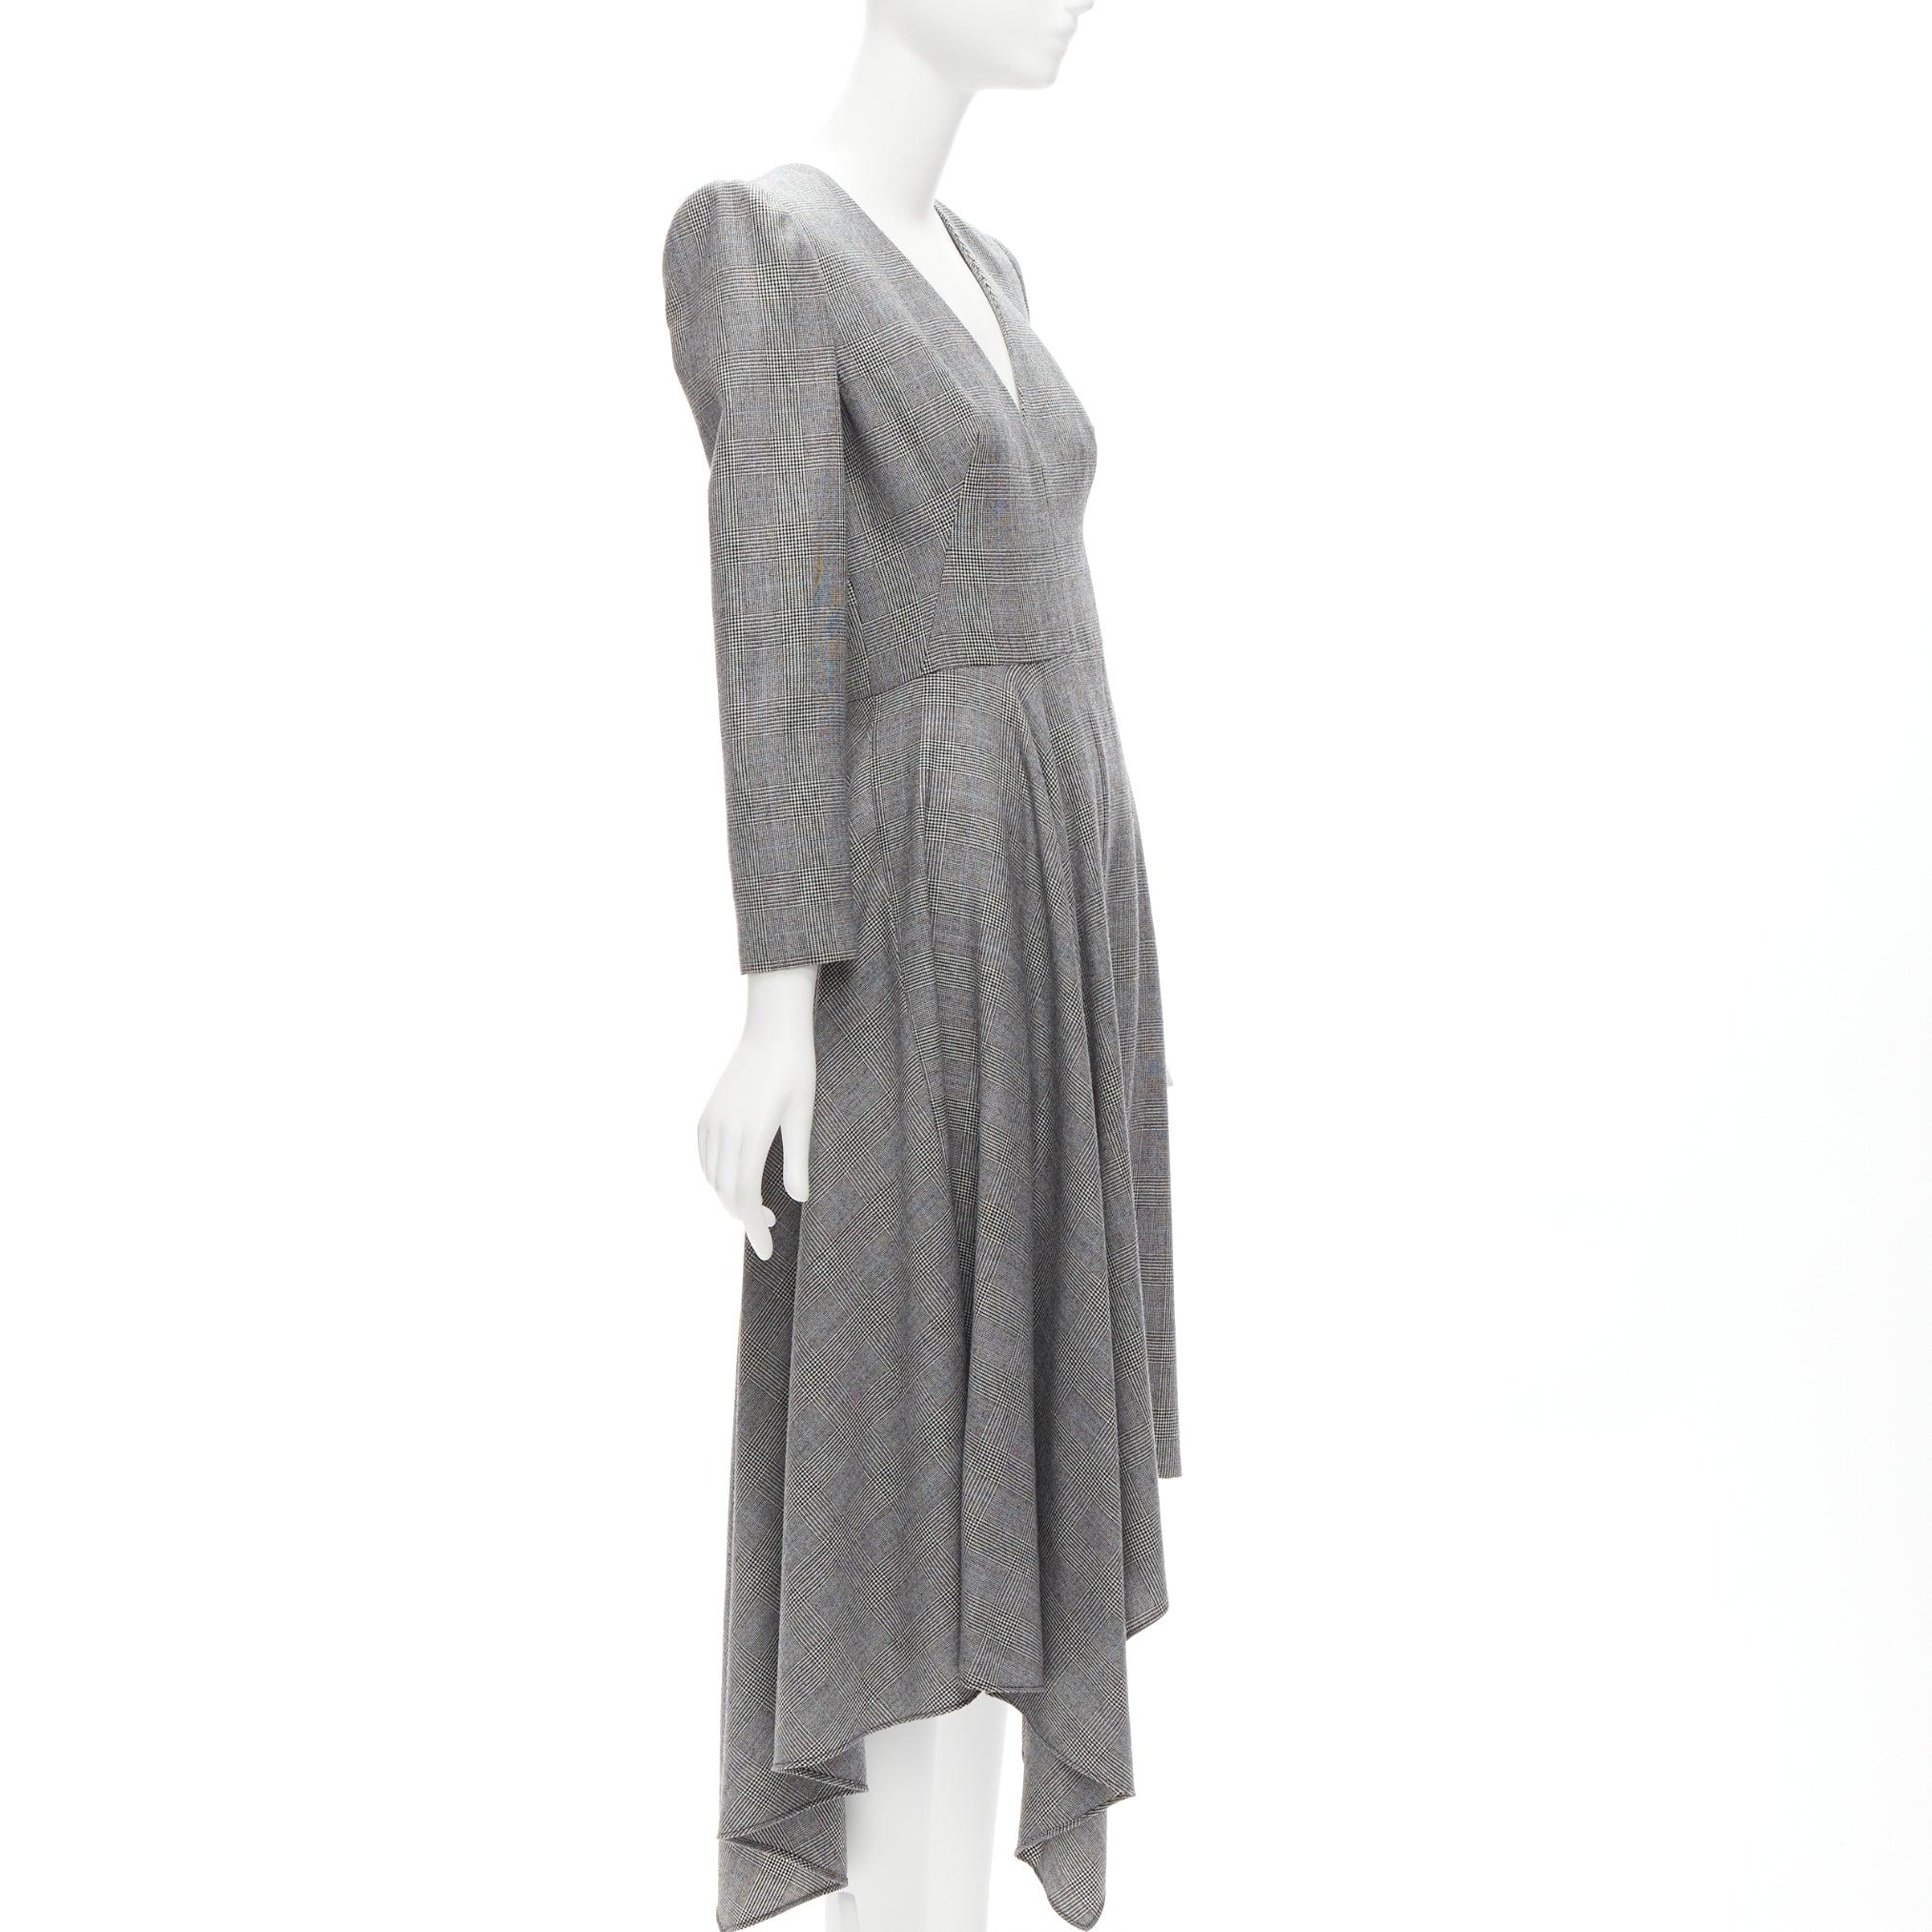 ALEXANDER MCQUEEN 2020 grey houndstooth wool V-neck asymmetric drape dress IT40 L
Reference: TGAS/D00951
Brand: Alexander McQueen
Designer: Sarah Burton
Collection: 2020
Material: Wool, Blend
Color: Grey
Pattern: Houndstooth
Closure: Zip
Extra